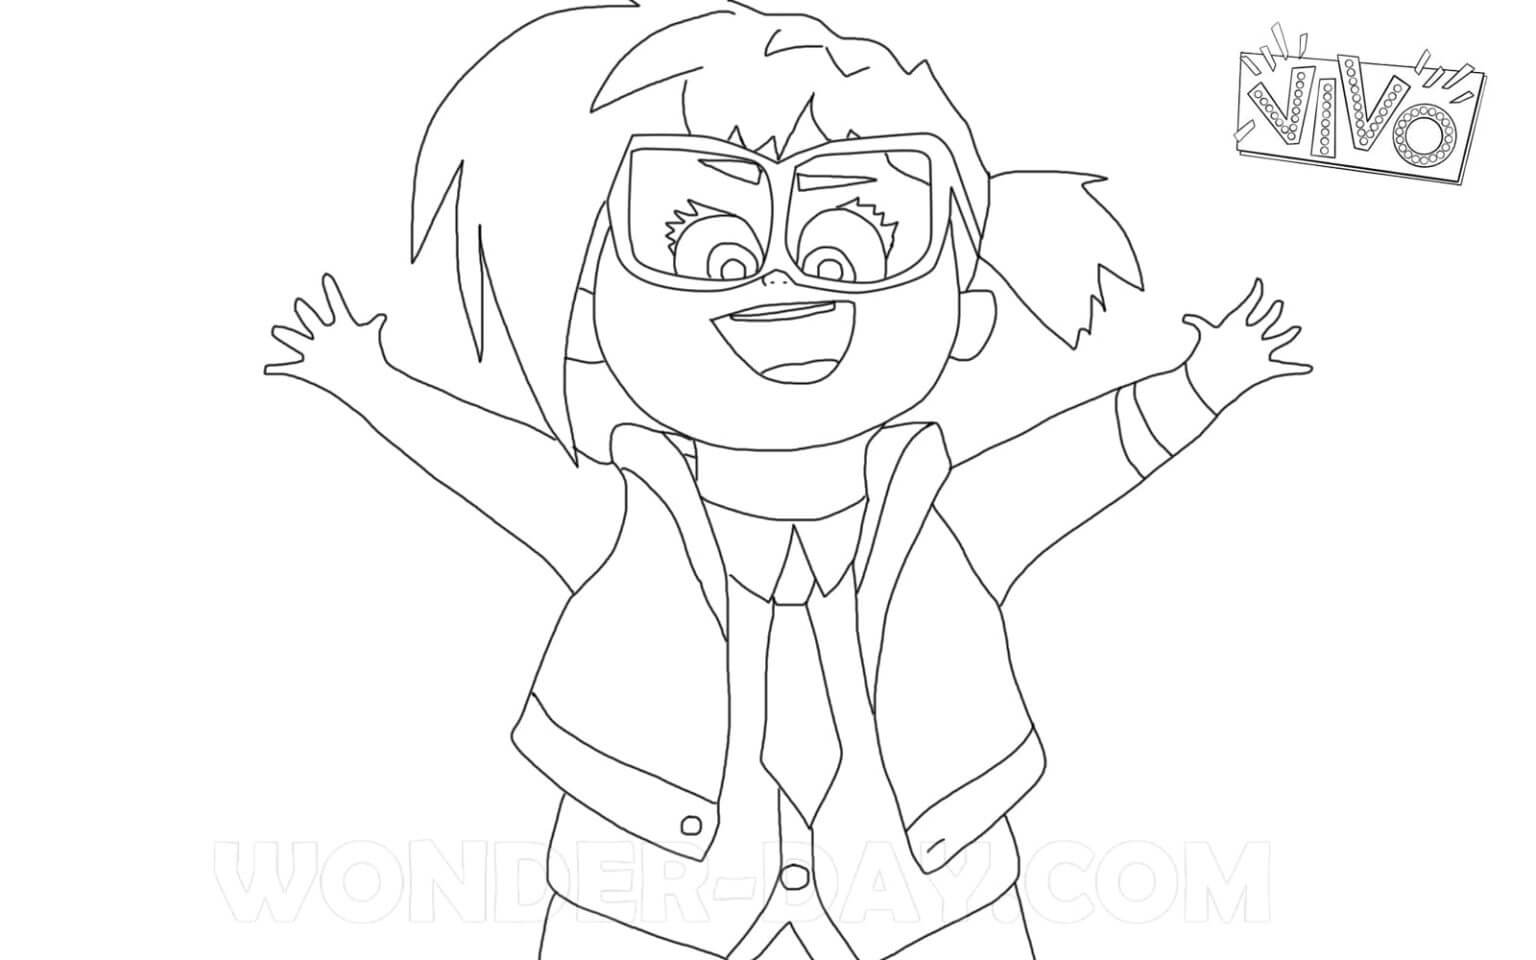 Happy Gabriela coloring page - Download, Print or Color Online for Free